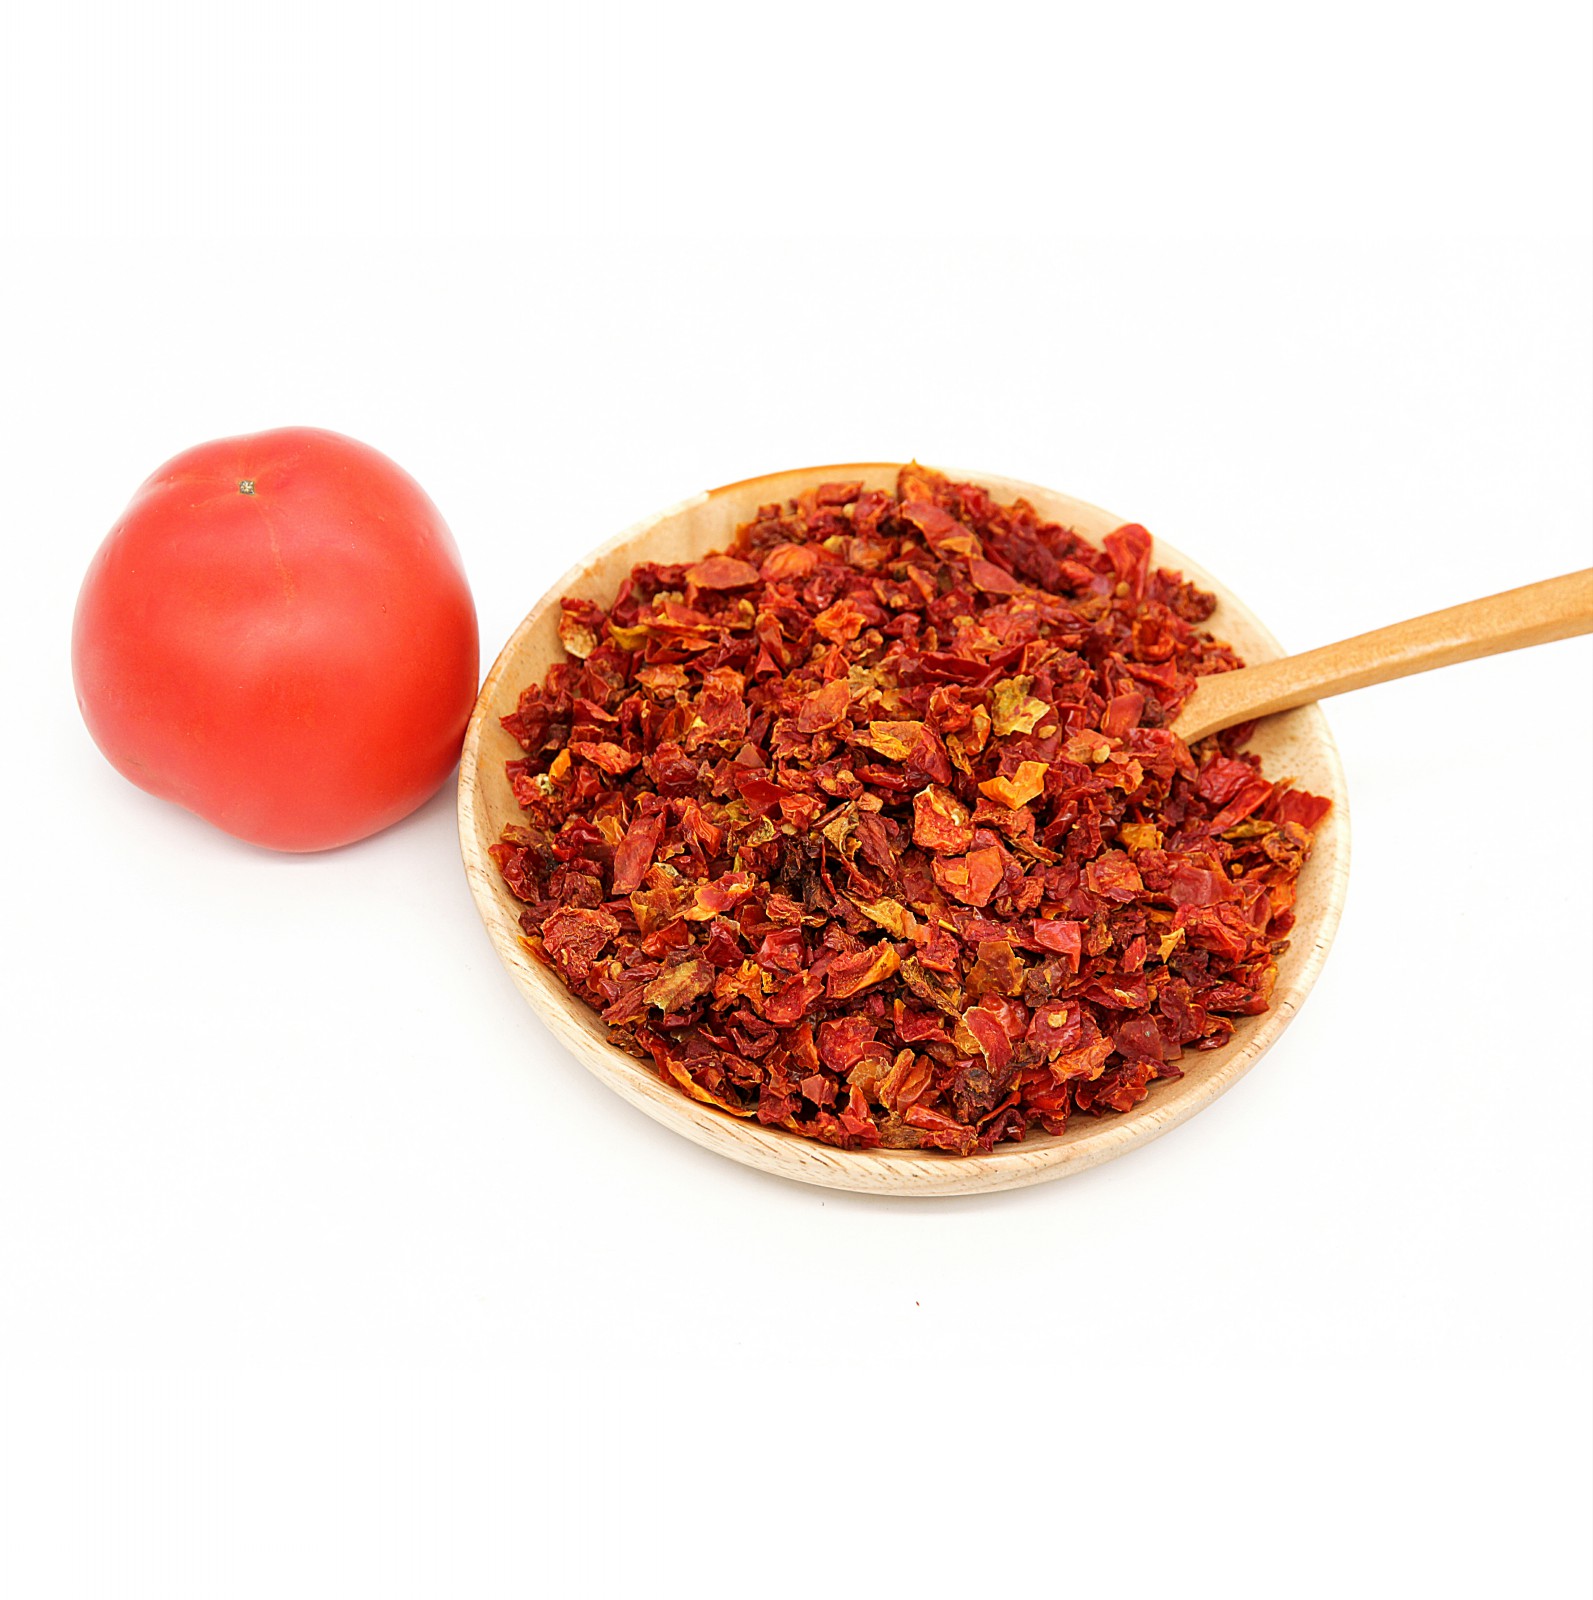 Dehydrated tomato flakes